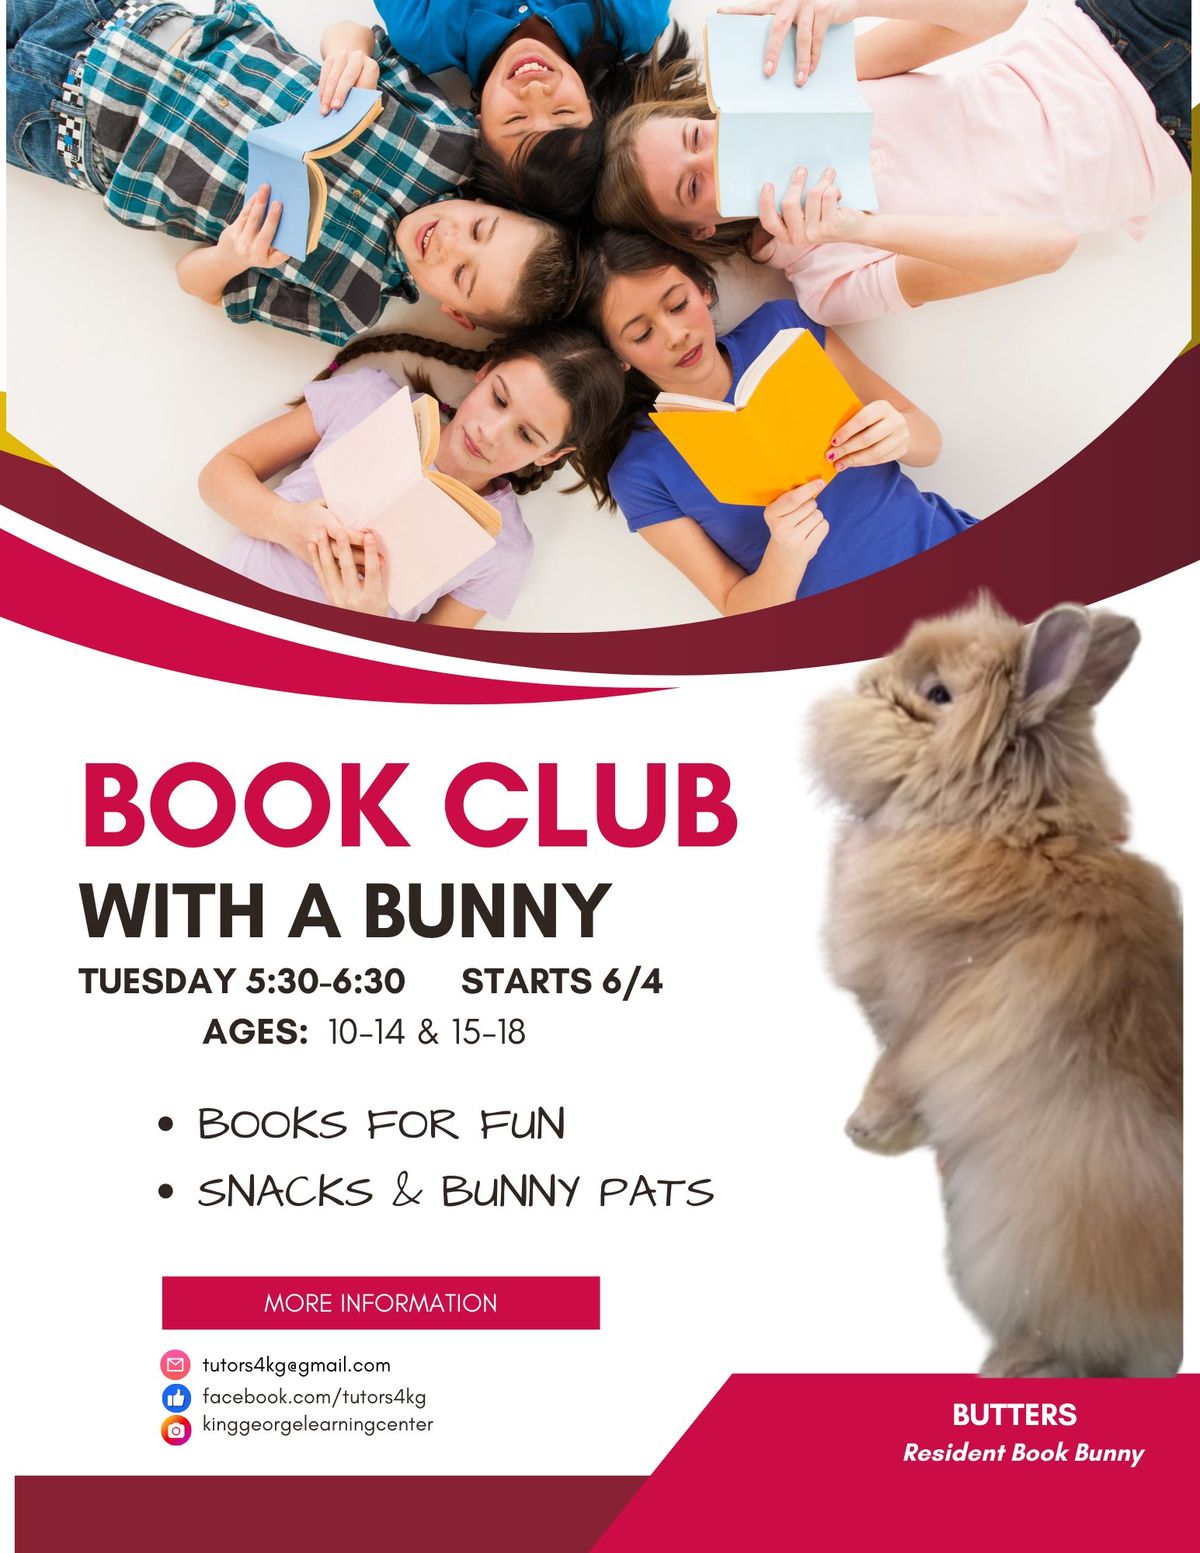 Bookclub with a Bunny